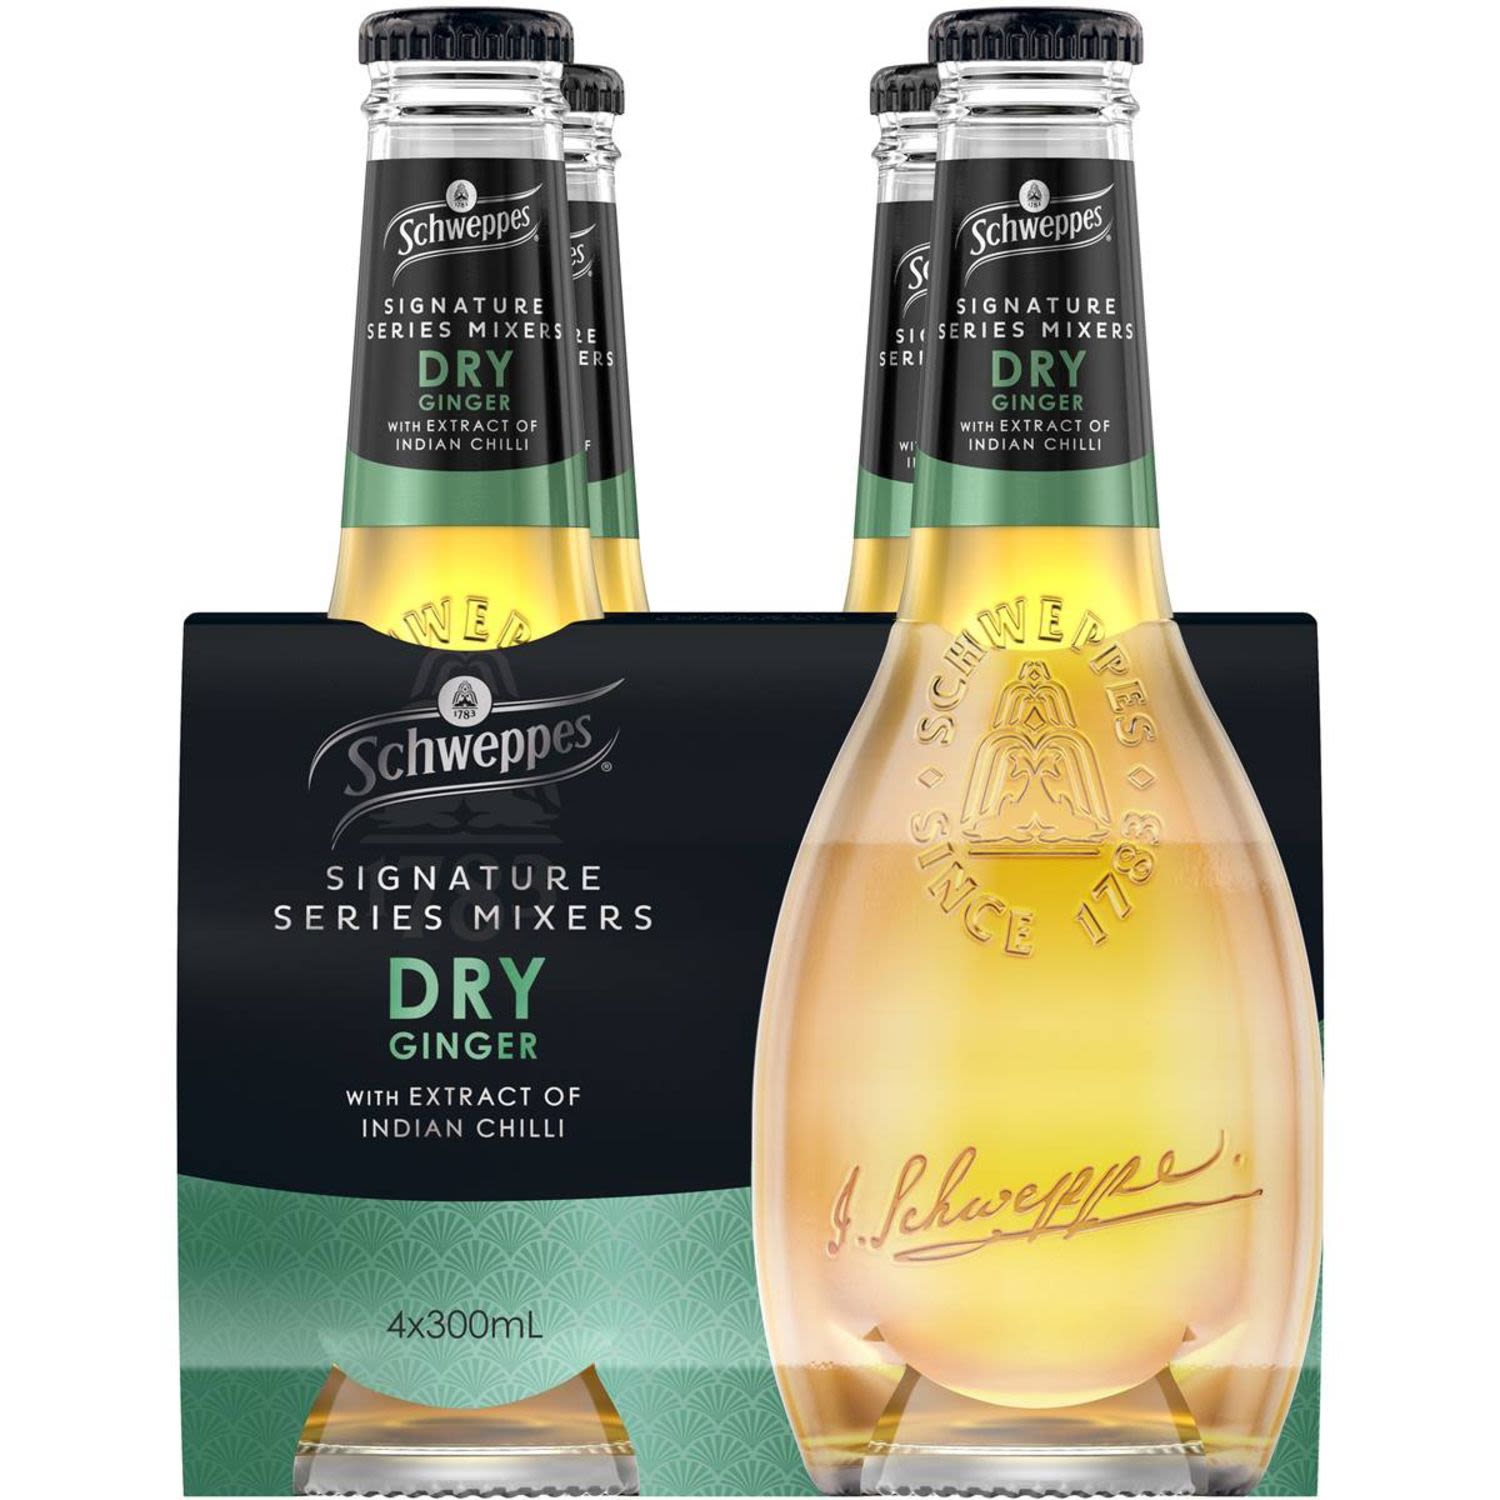 Schweppes Signature Series Mixers Dry Ginger 300ml, 4 Each